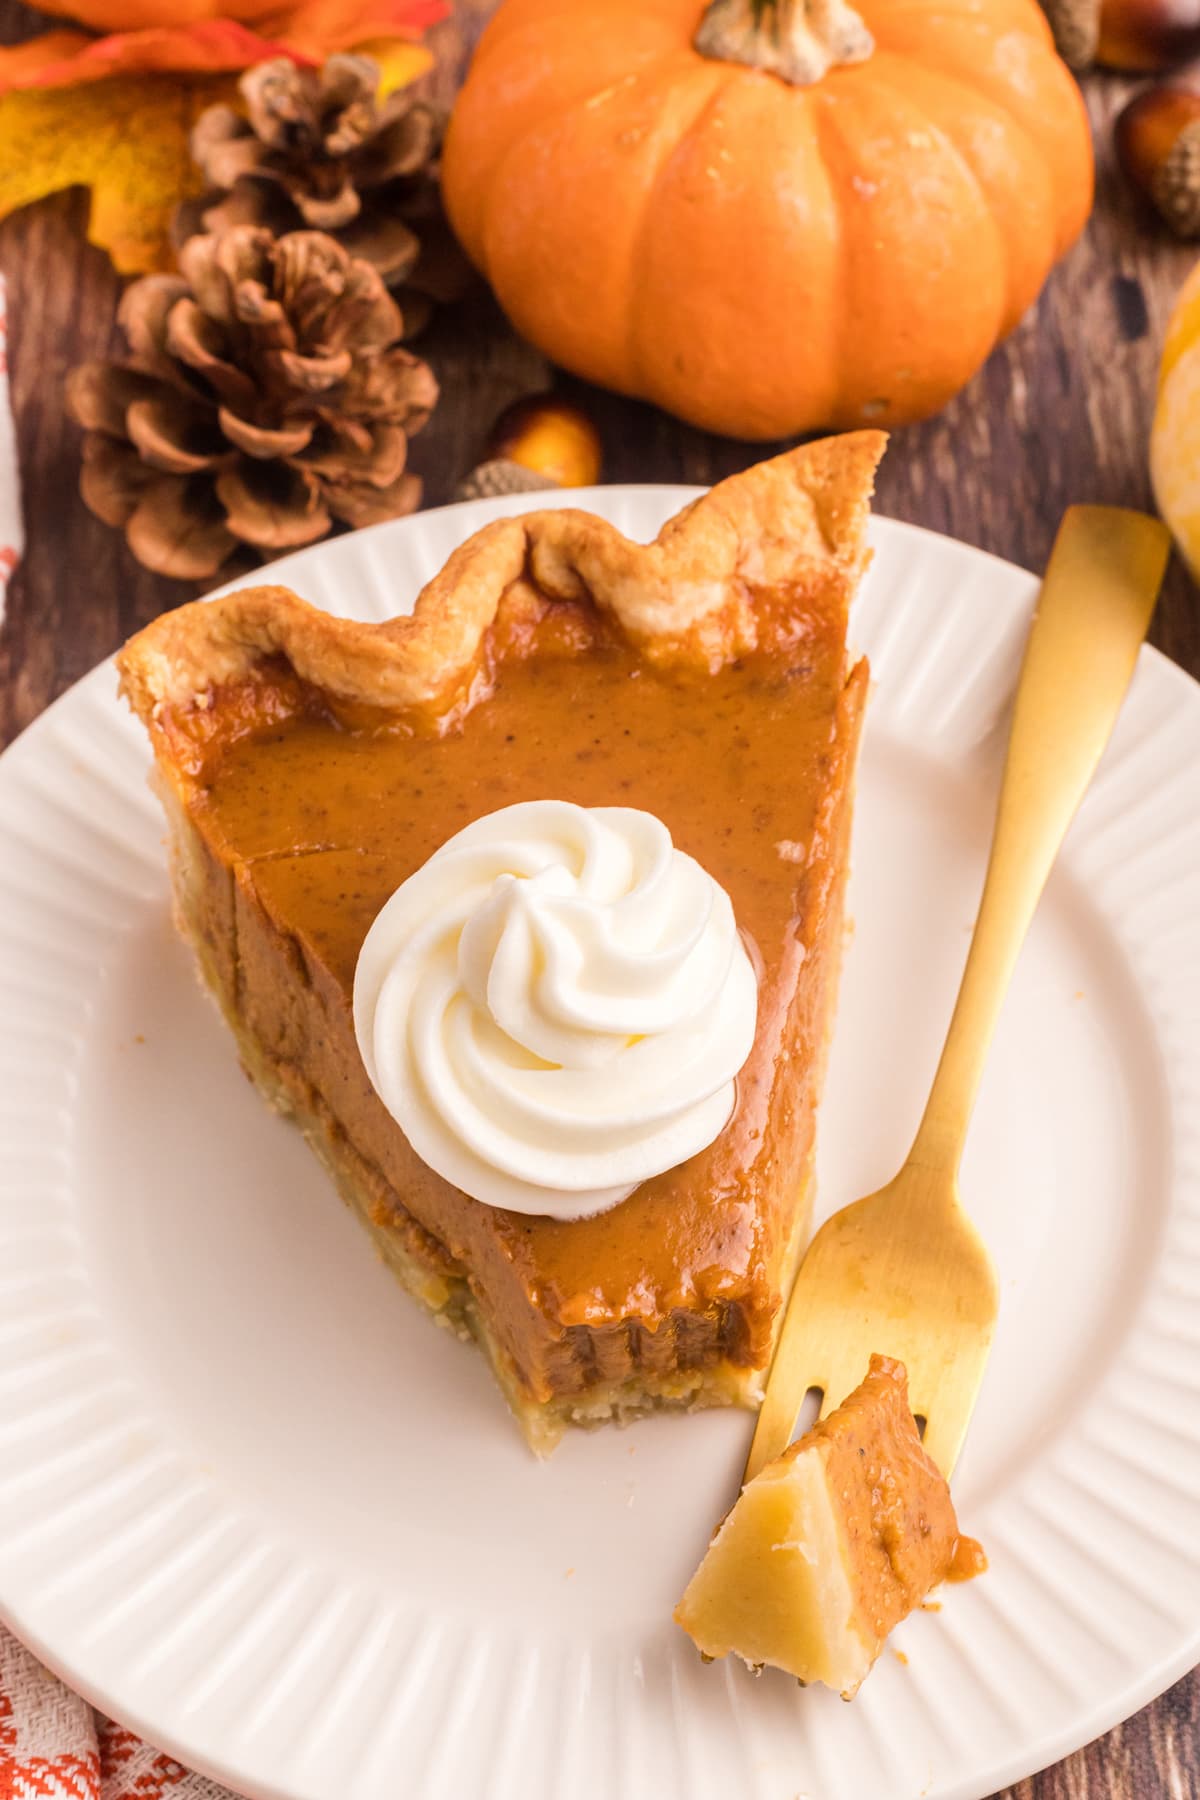 Pumpkin pie on a white plate with a fork.